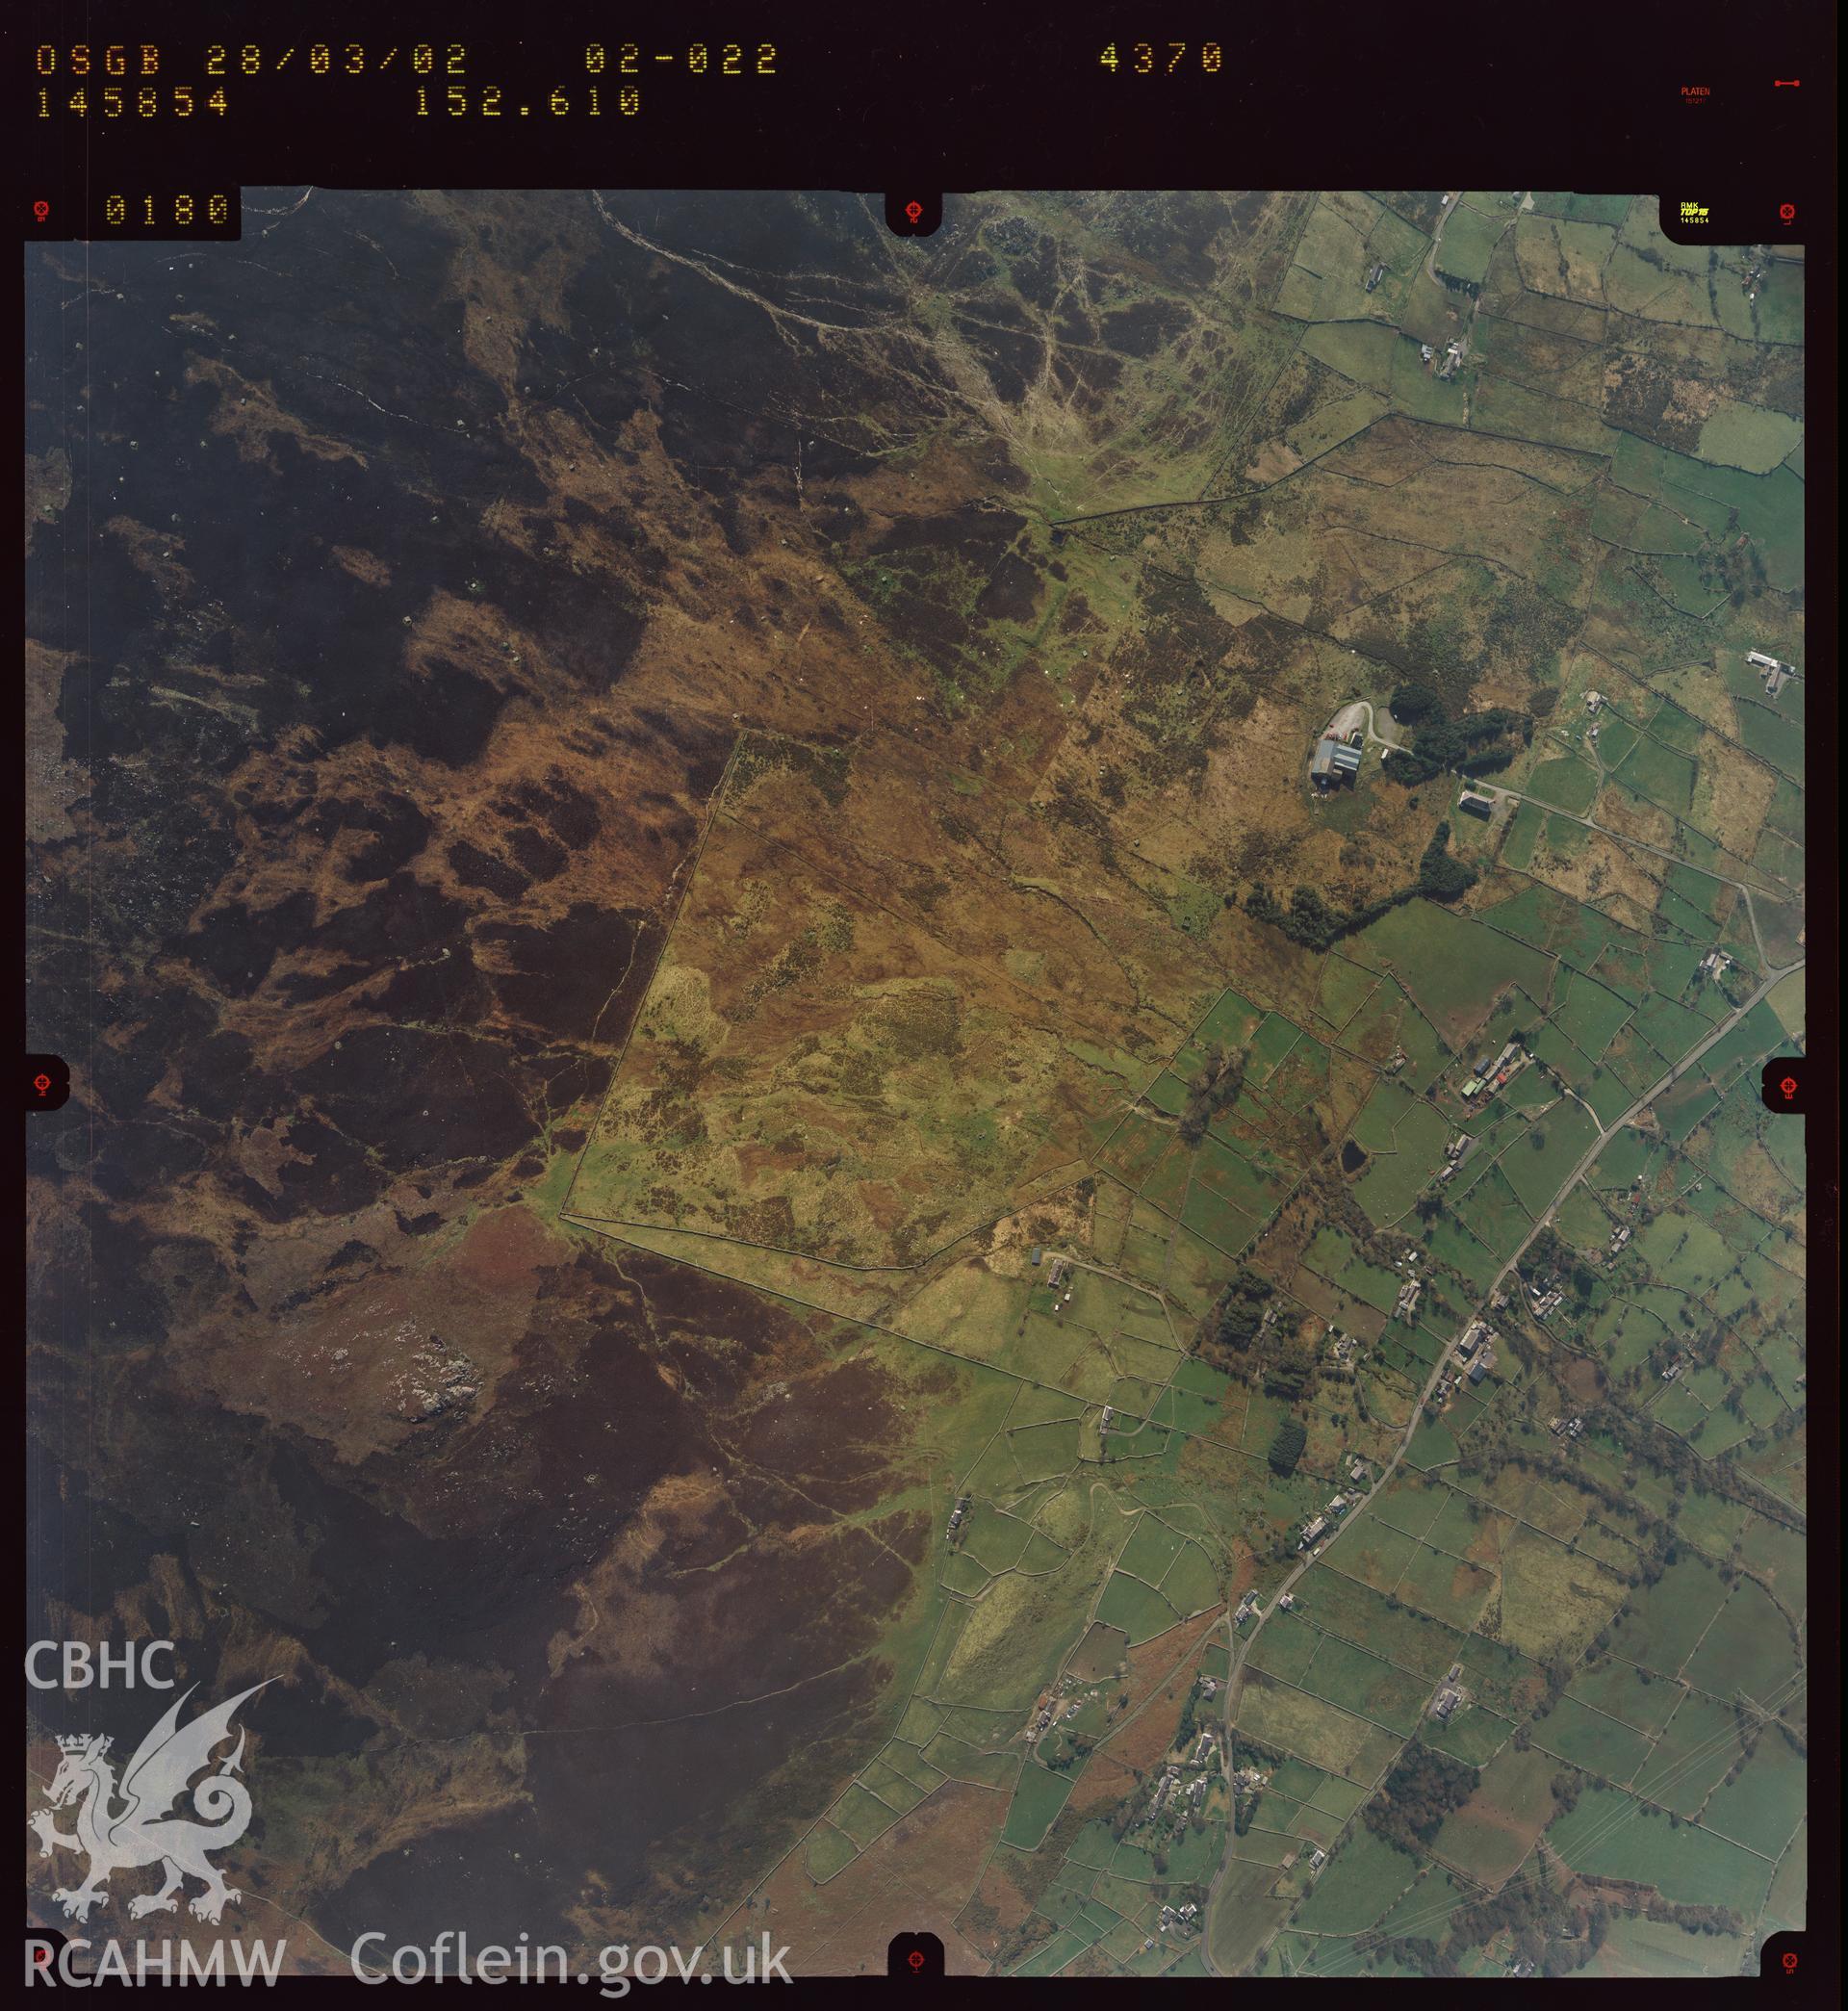 Digital copy of an aerial view of the Ceunant area SH5366 6122 taken by Ordnance Survey in 2002.